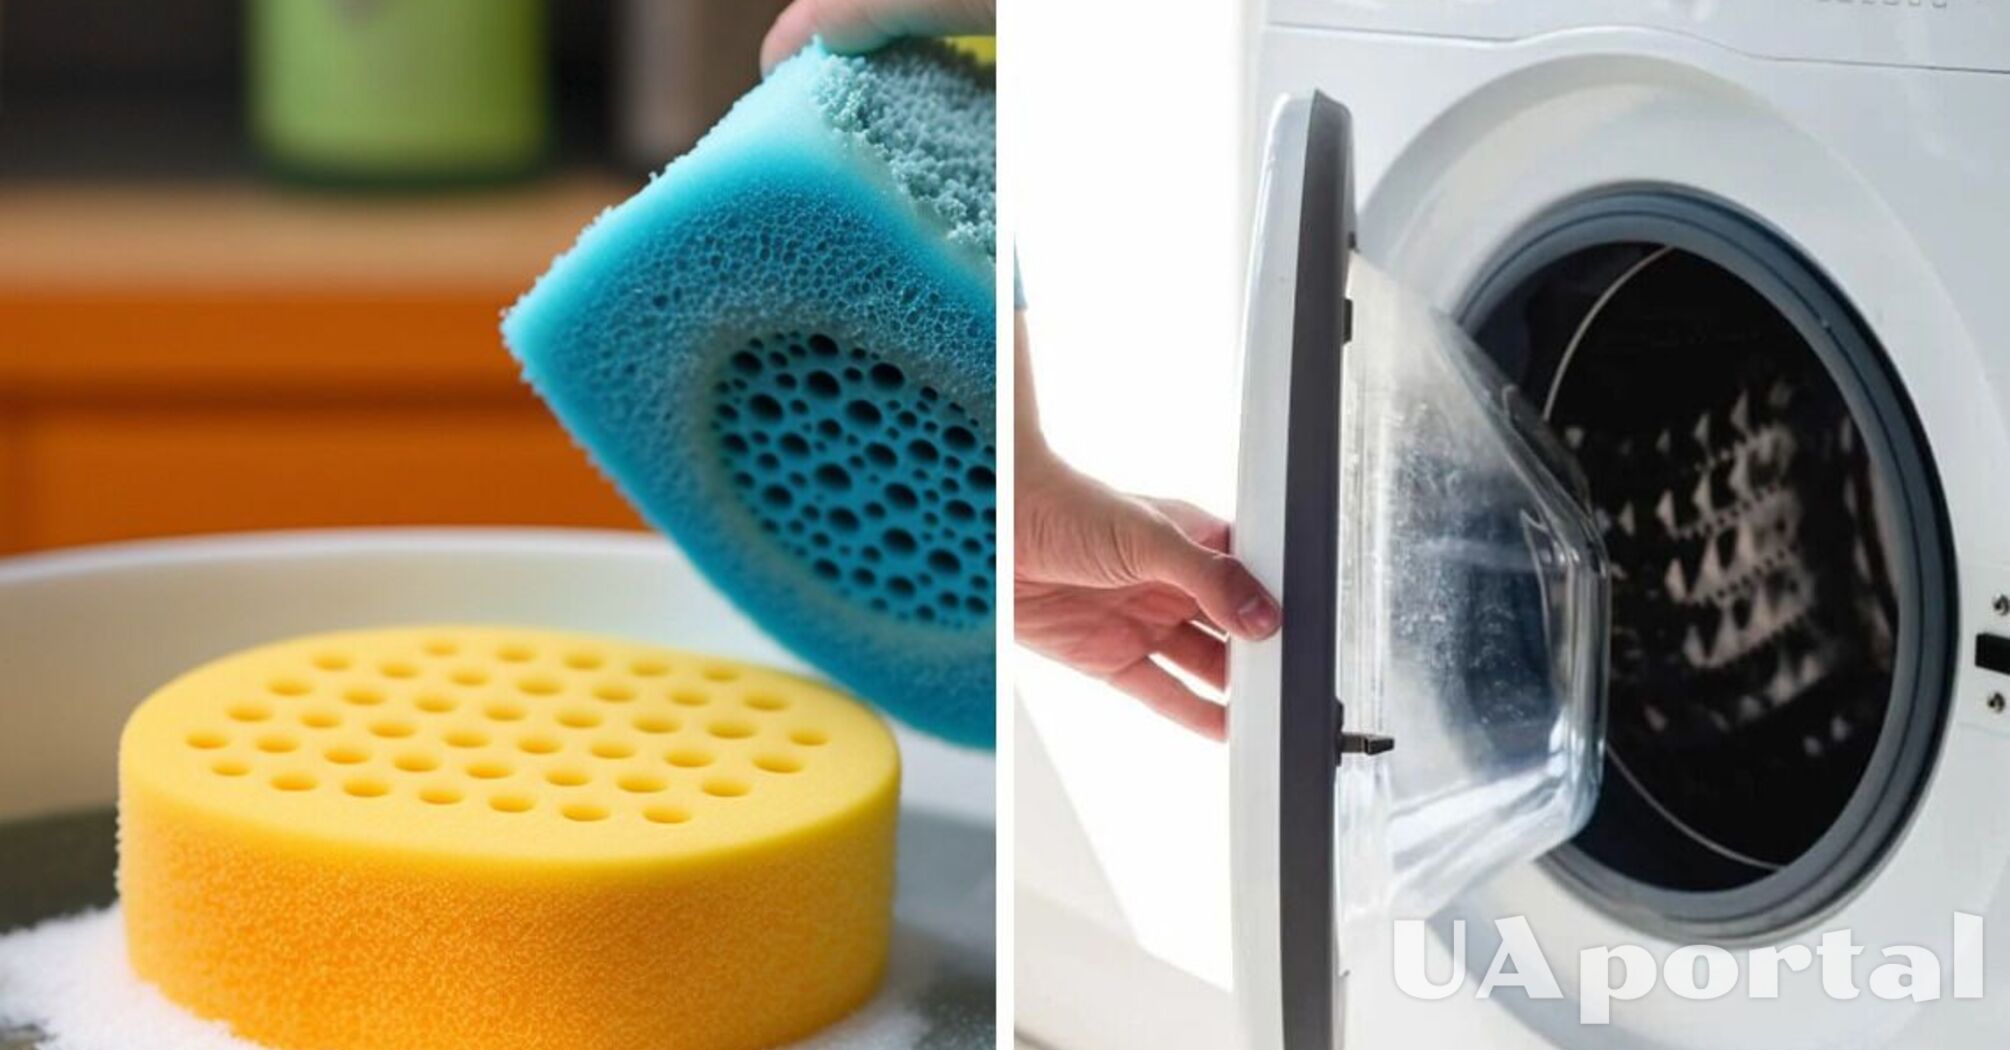 Why throw a sponge into the washing machine during washing: a useful life hack